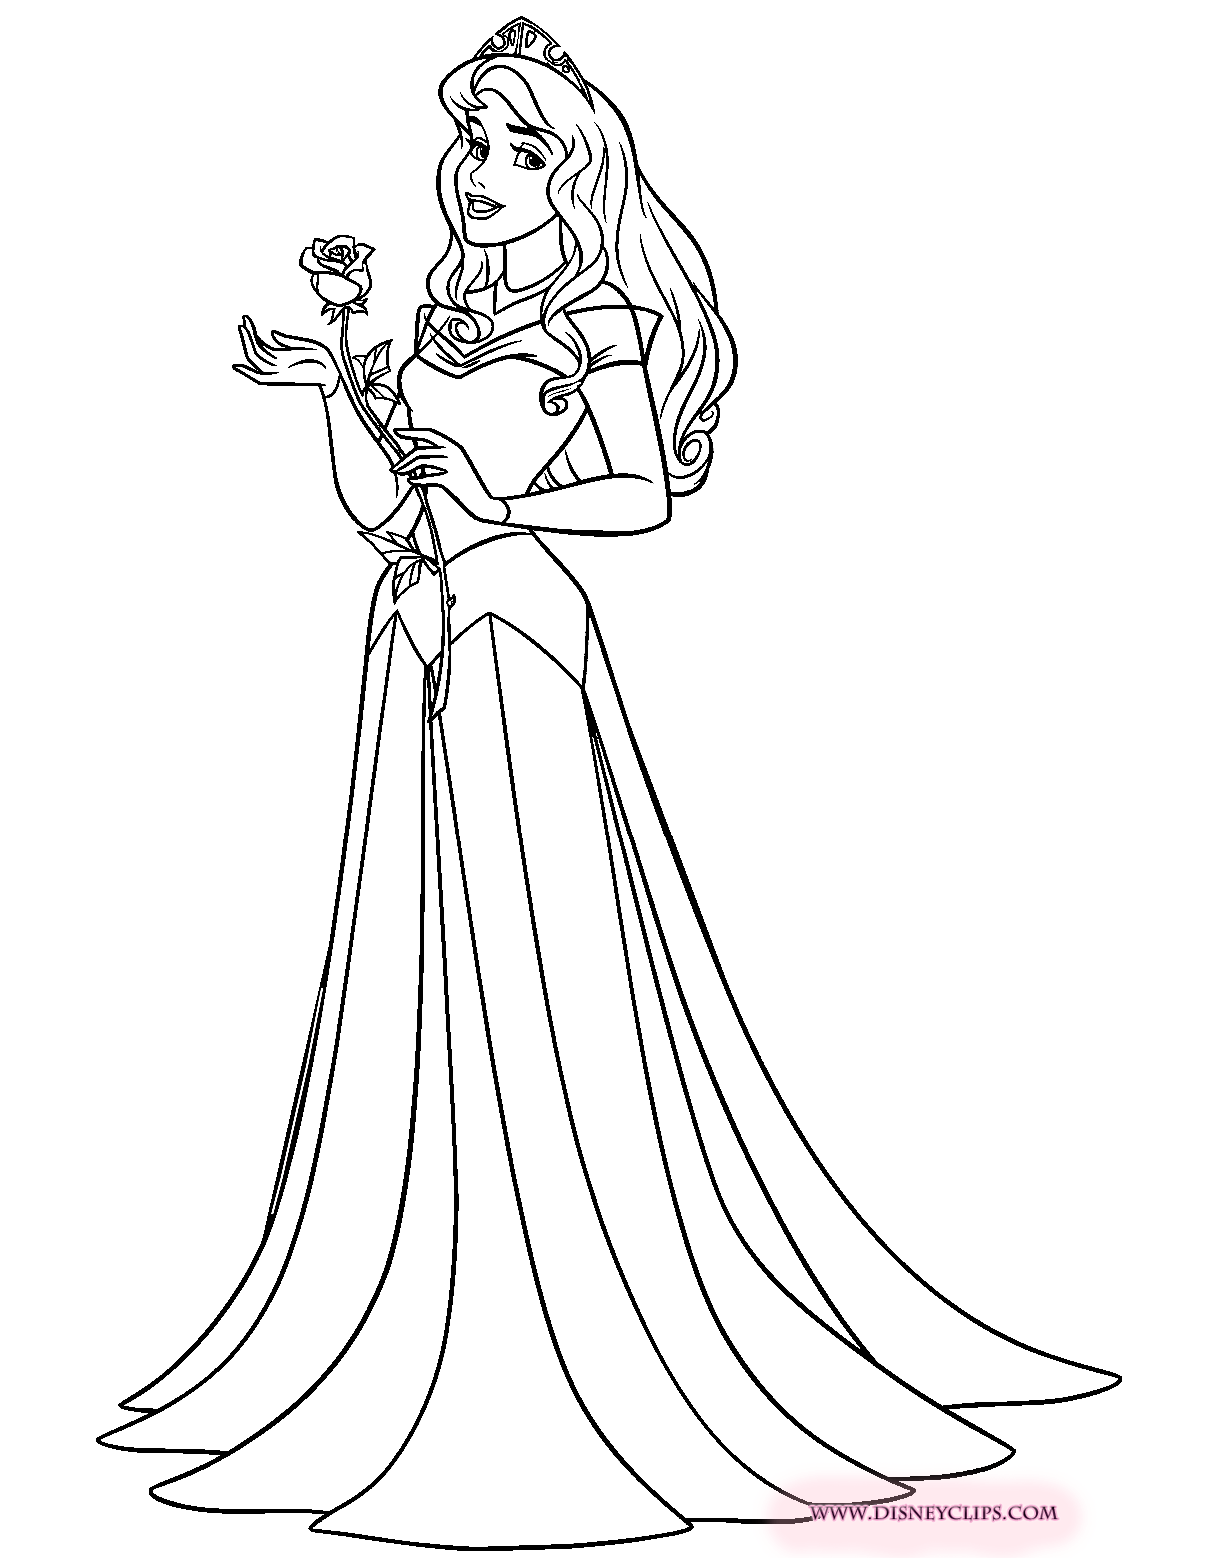 Sleeping Beauty Coloring Pages 3 | Disney Coloring Book